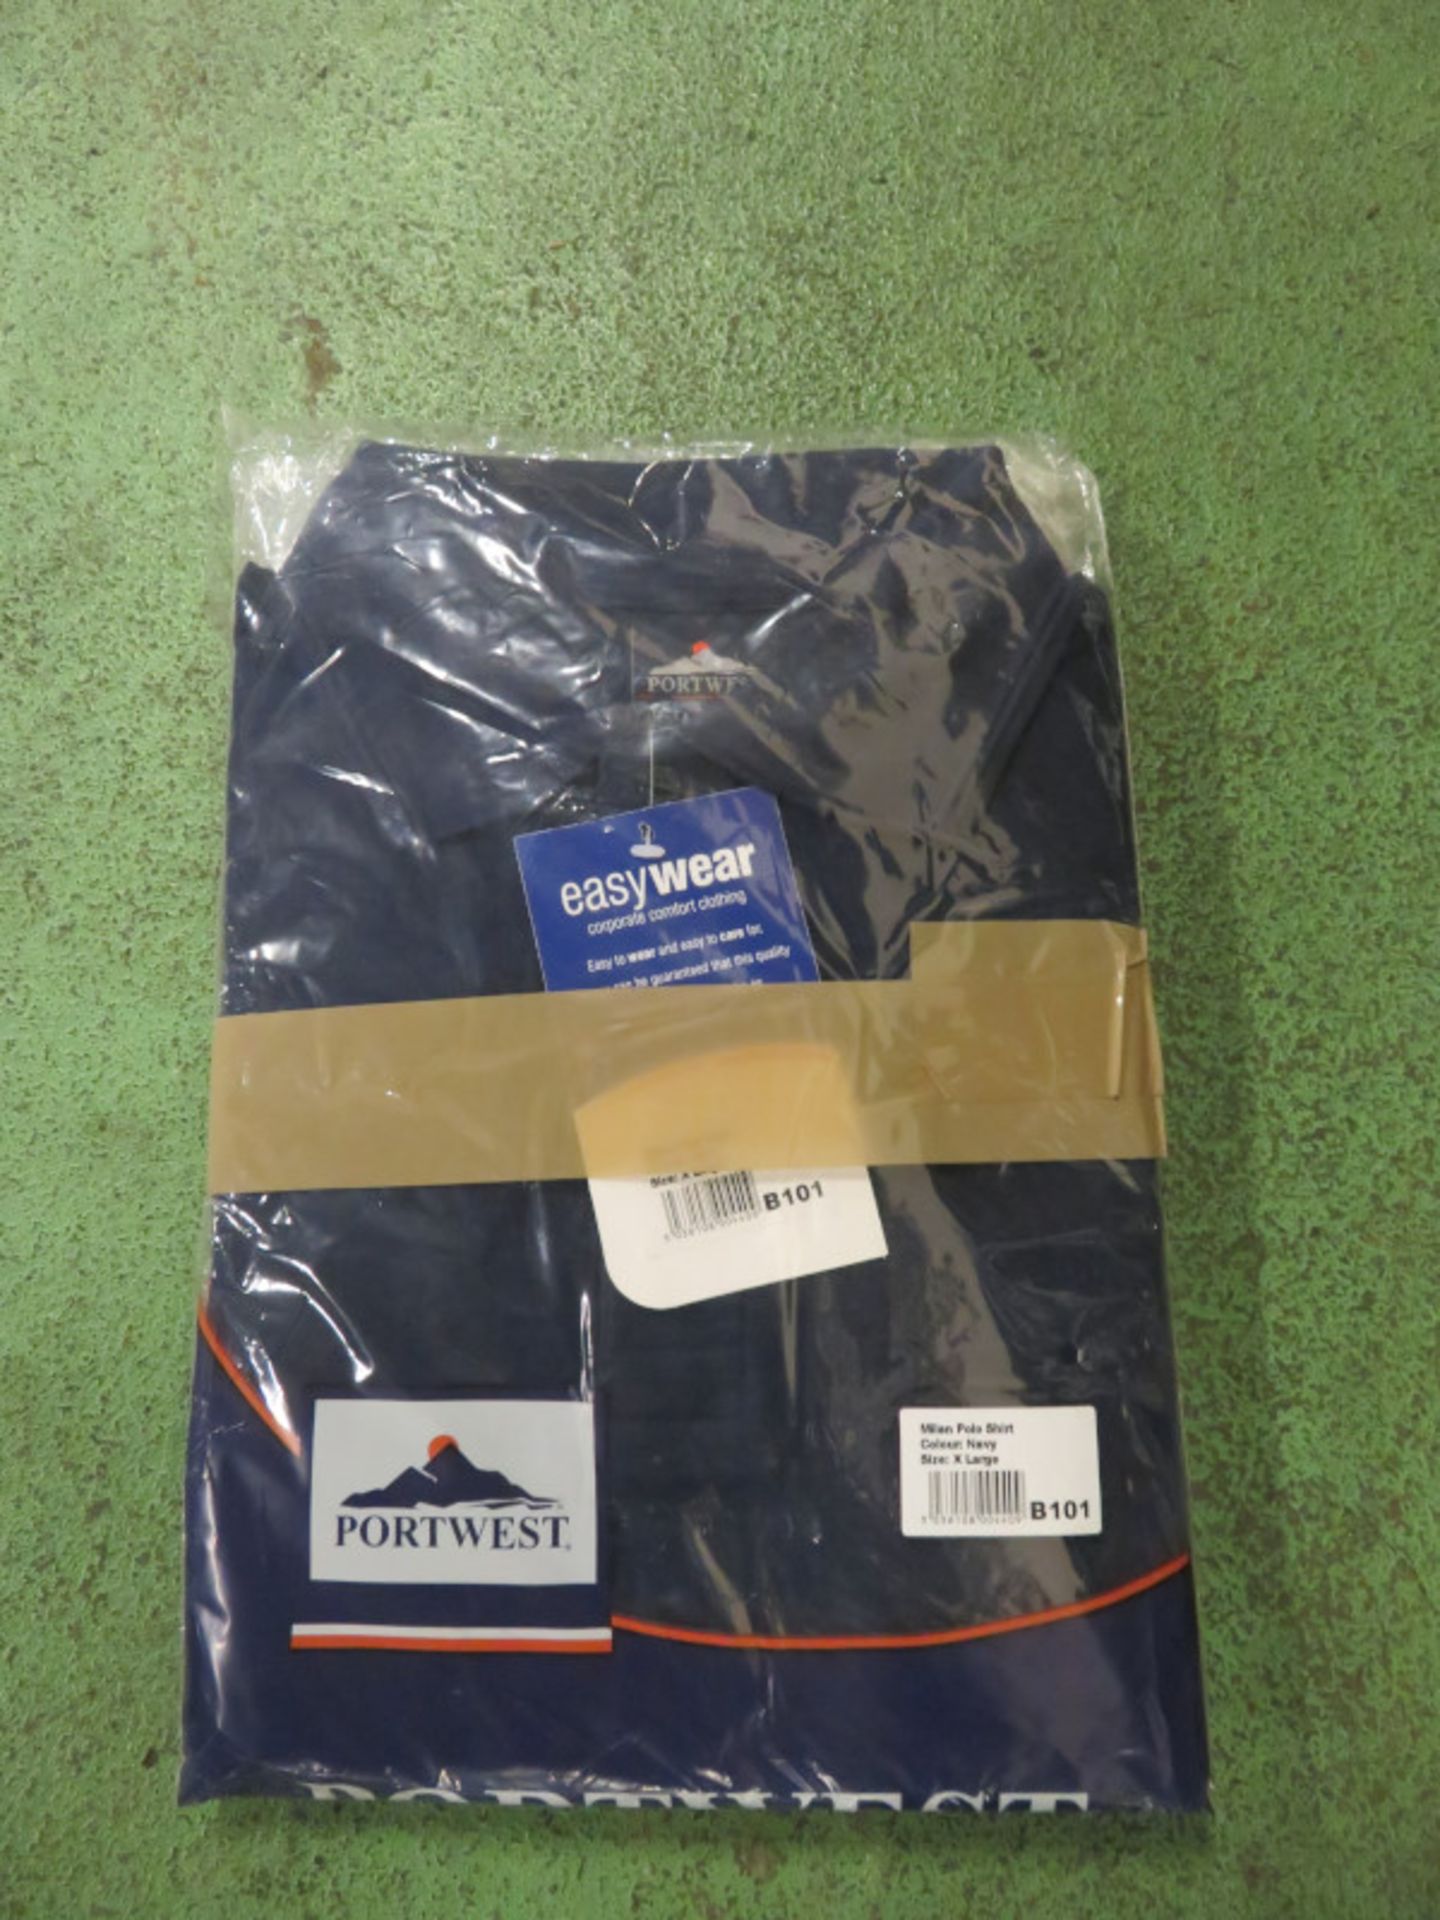 Portwest Liverpool Boiler suits - medium Navy x3, Standard coats Navy small x5, Milan Polo - Image 2 of 3